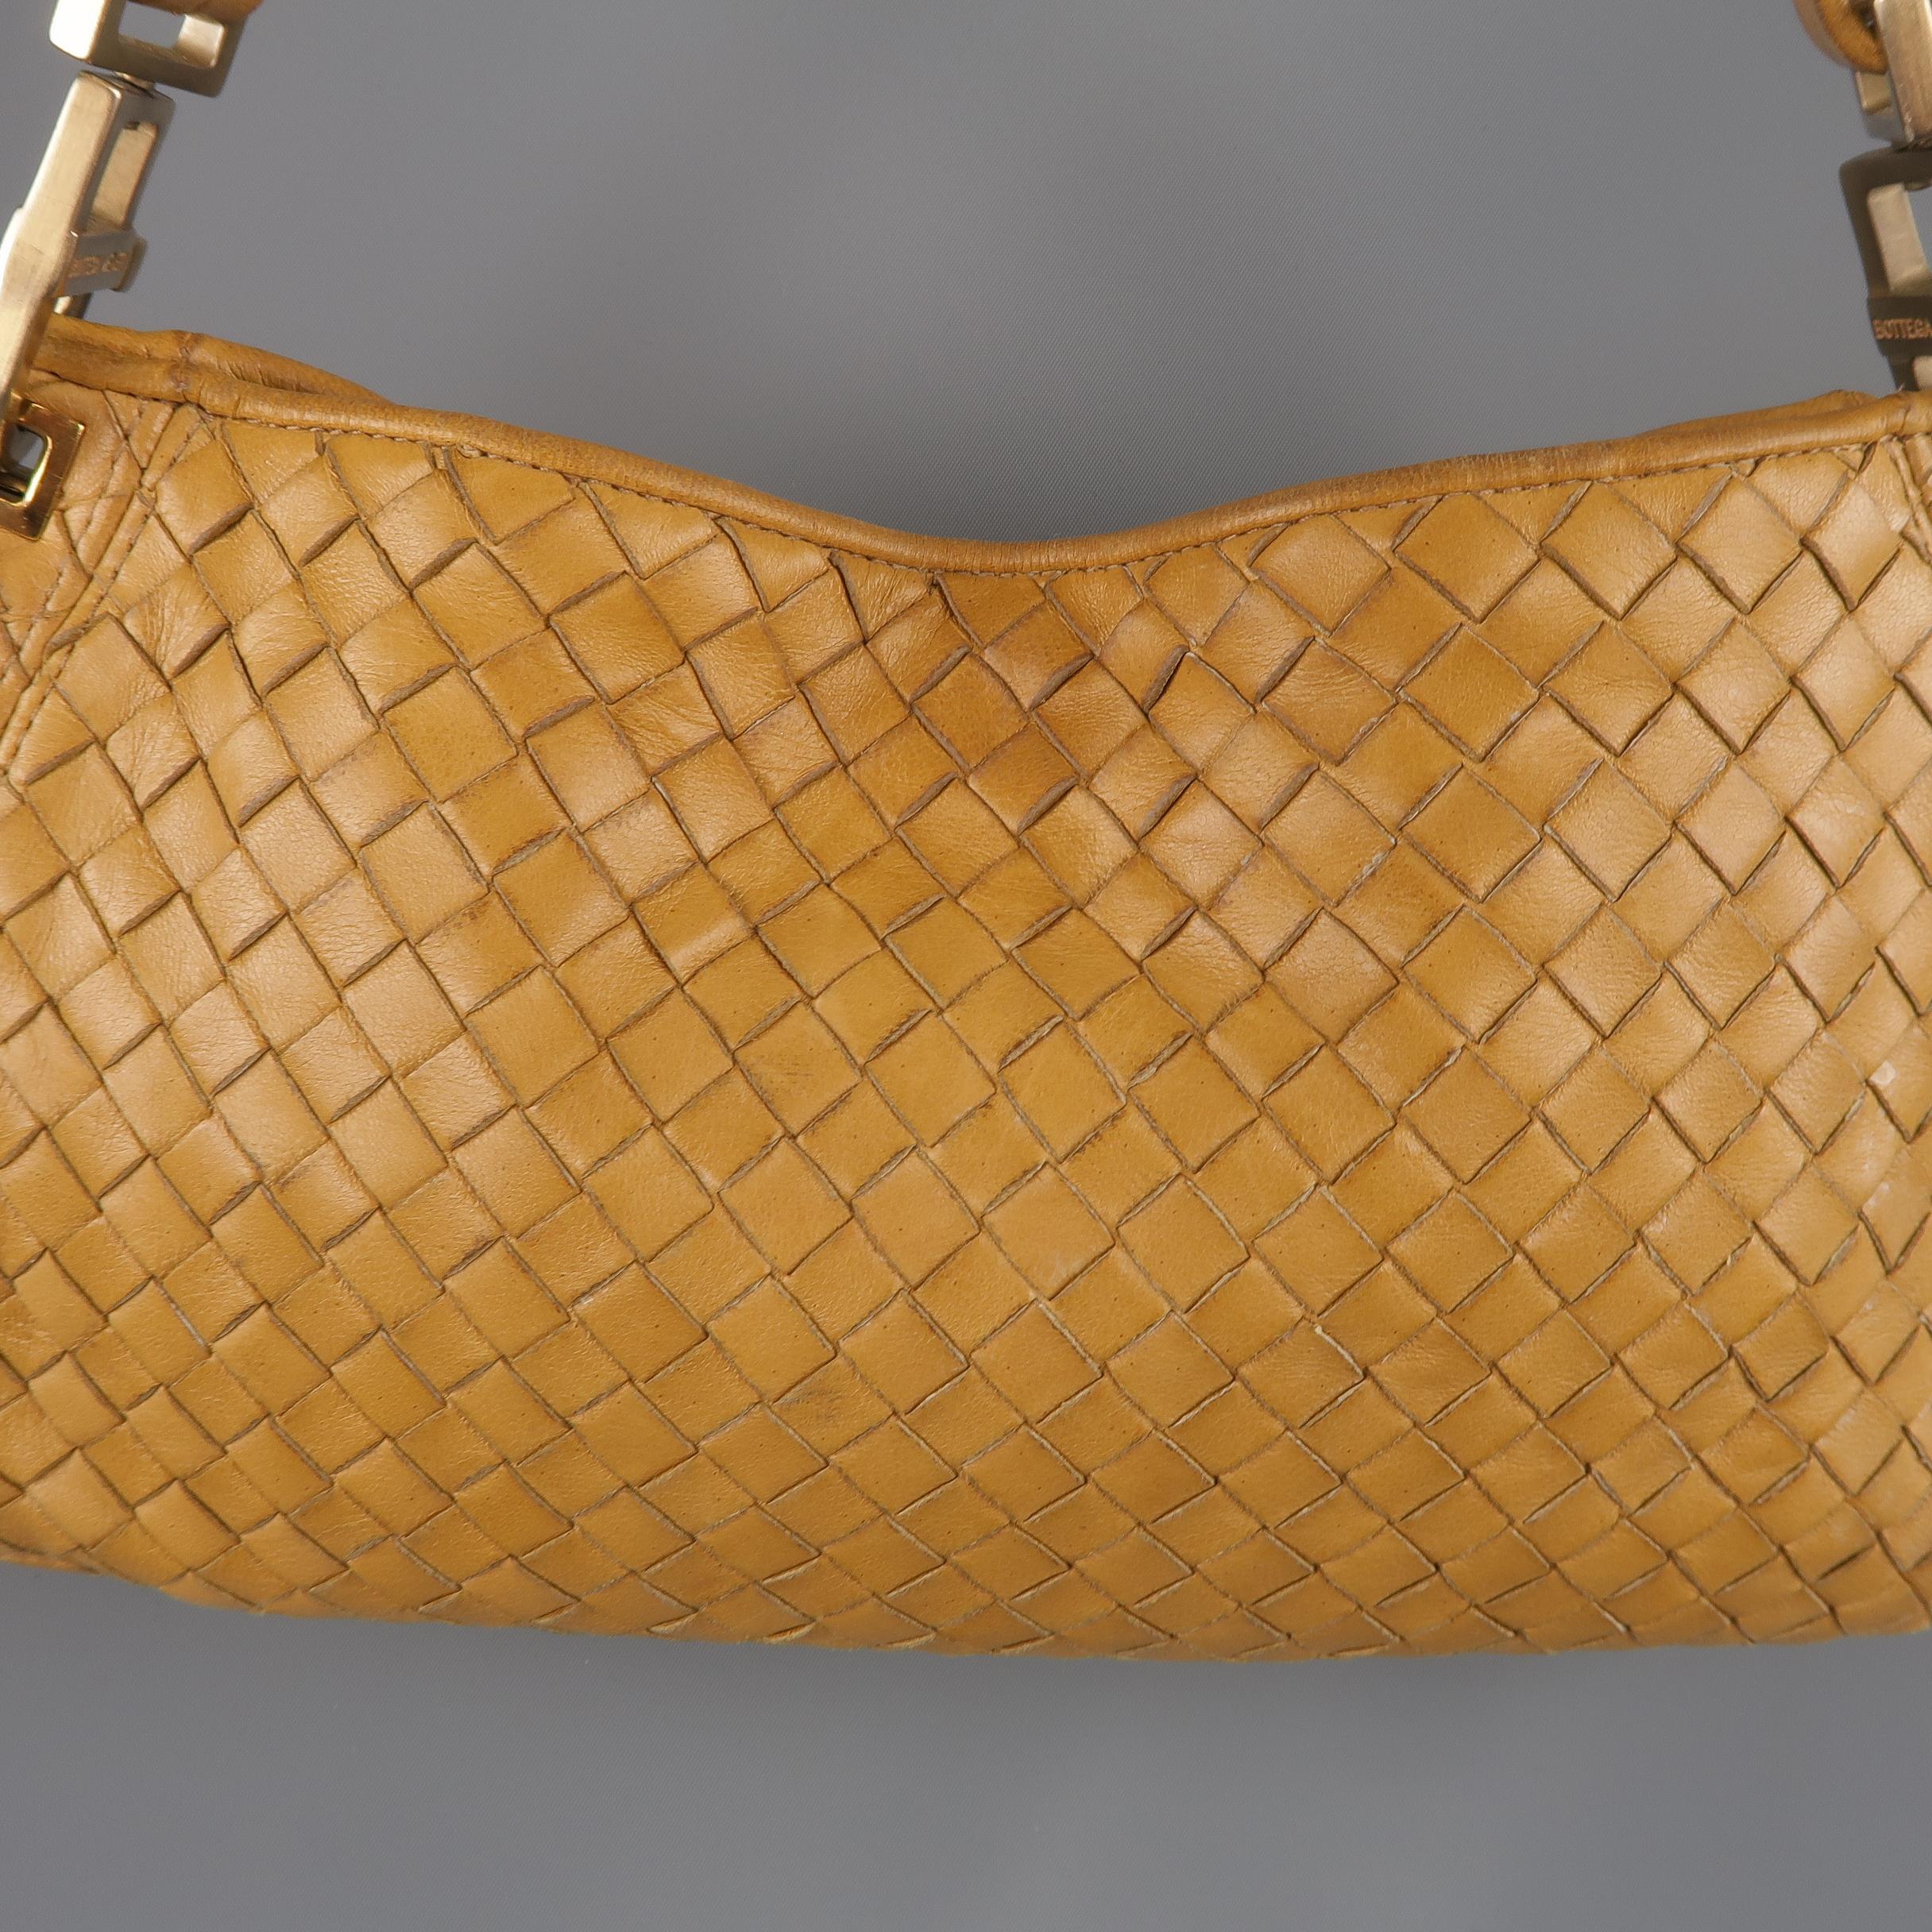 Vintage BOTTEGA VENETA shoulder bag comes in golden yellow Intrecciato woven leather with a detachable shoulder strap and snap top closure. Wear throughout leather and liner and strap damaged. As-is. Made in Italy.
 
Fair Pre-Owned Condition.
